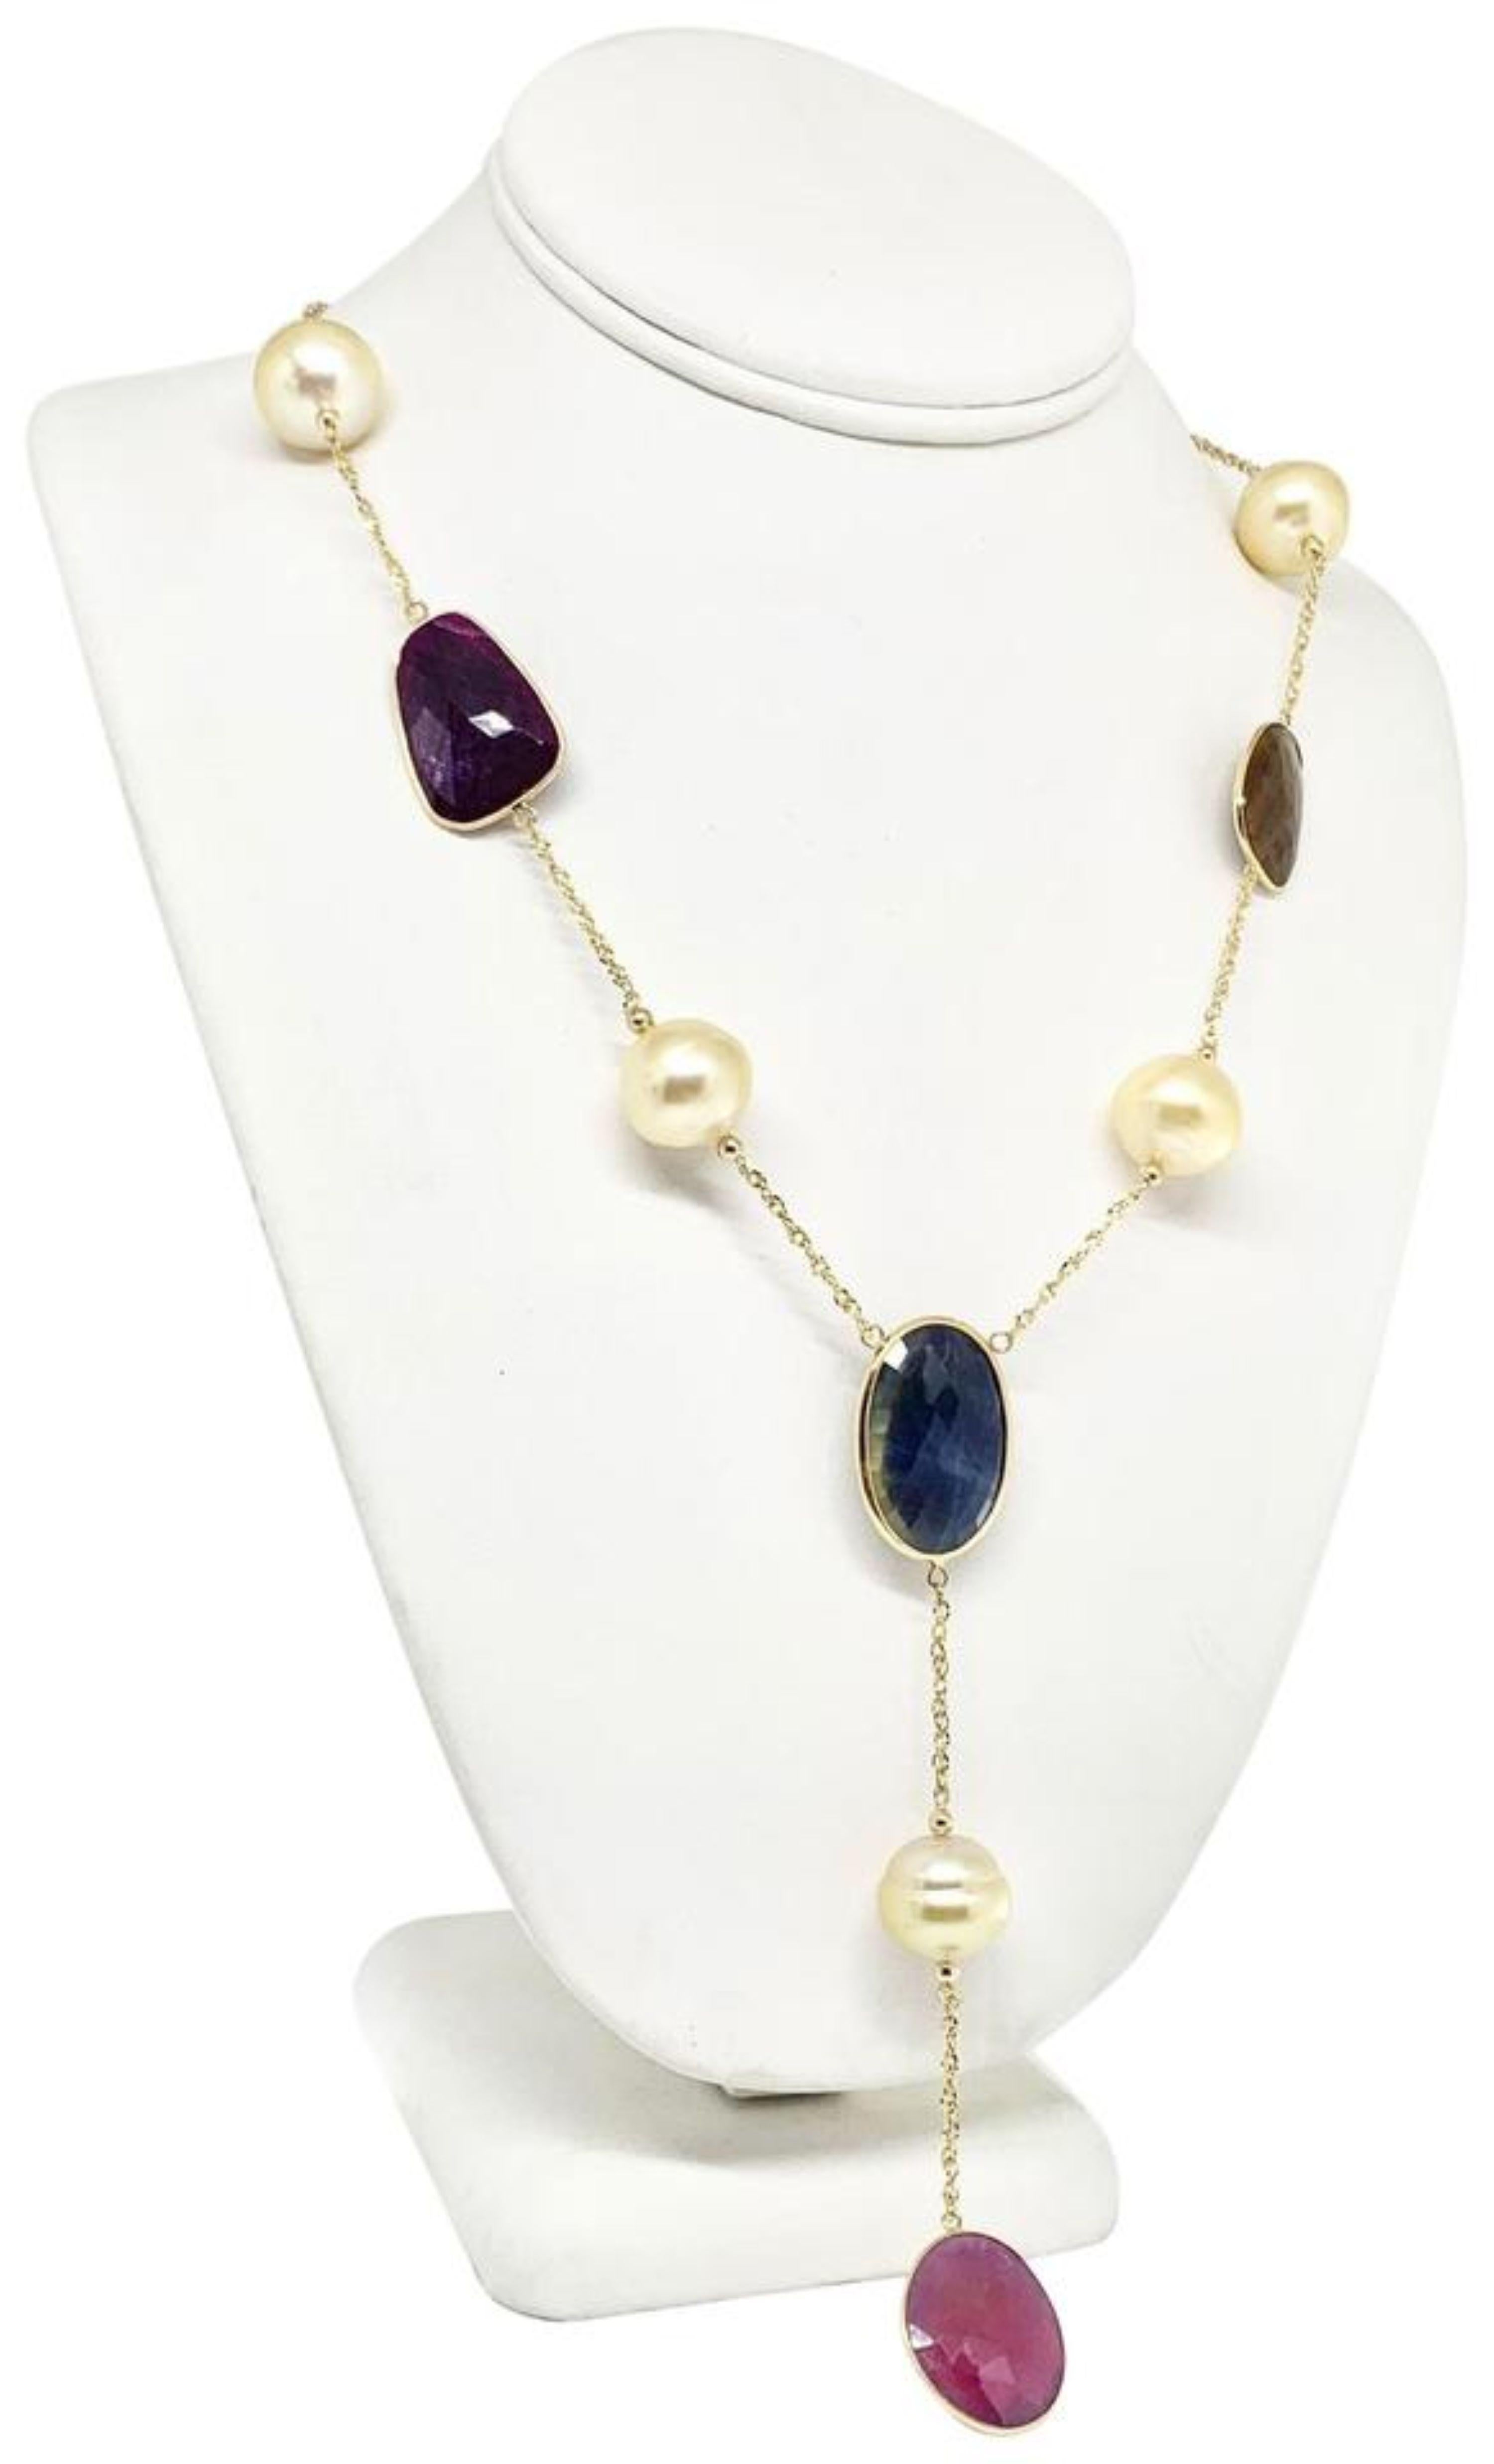 Fine Quality South Sea Pearl Ruby Sapphire Necklace 15.5 mm 14k Gold Certified $4,950 820707

This is a Unique Custom Made Glamorous Piece of Jewelry!

Nothing says, “I Love you” more than Diamonds and Pearls!

This South Sea pearl necklace has been